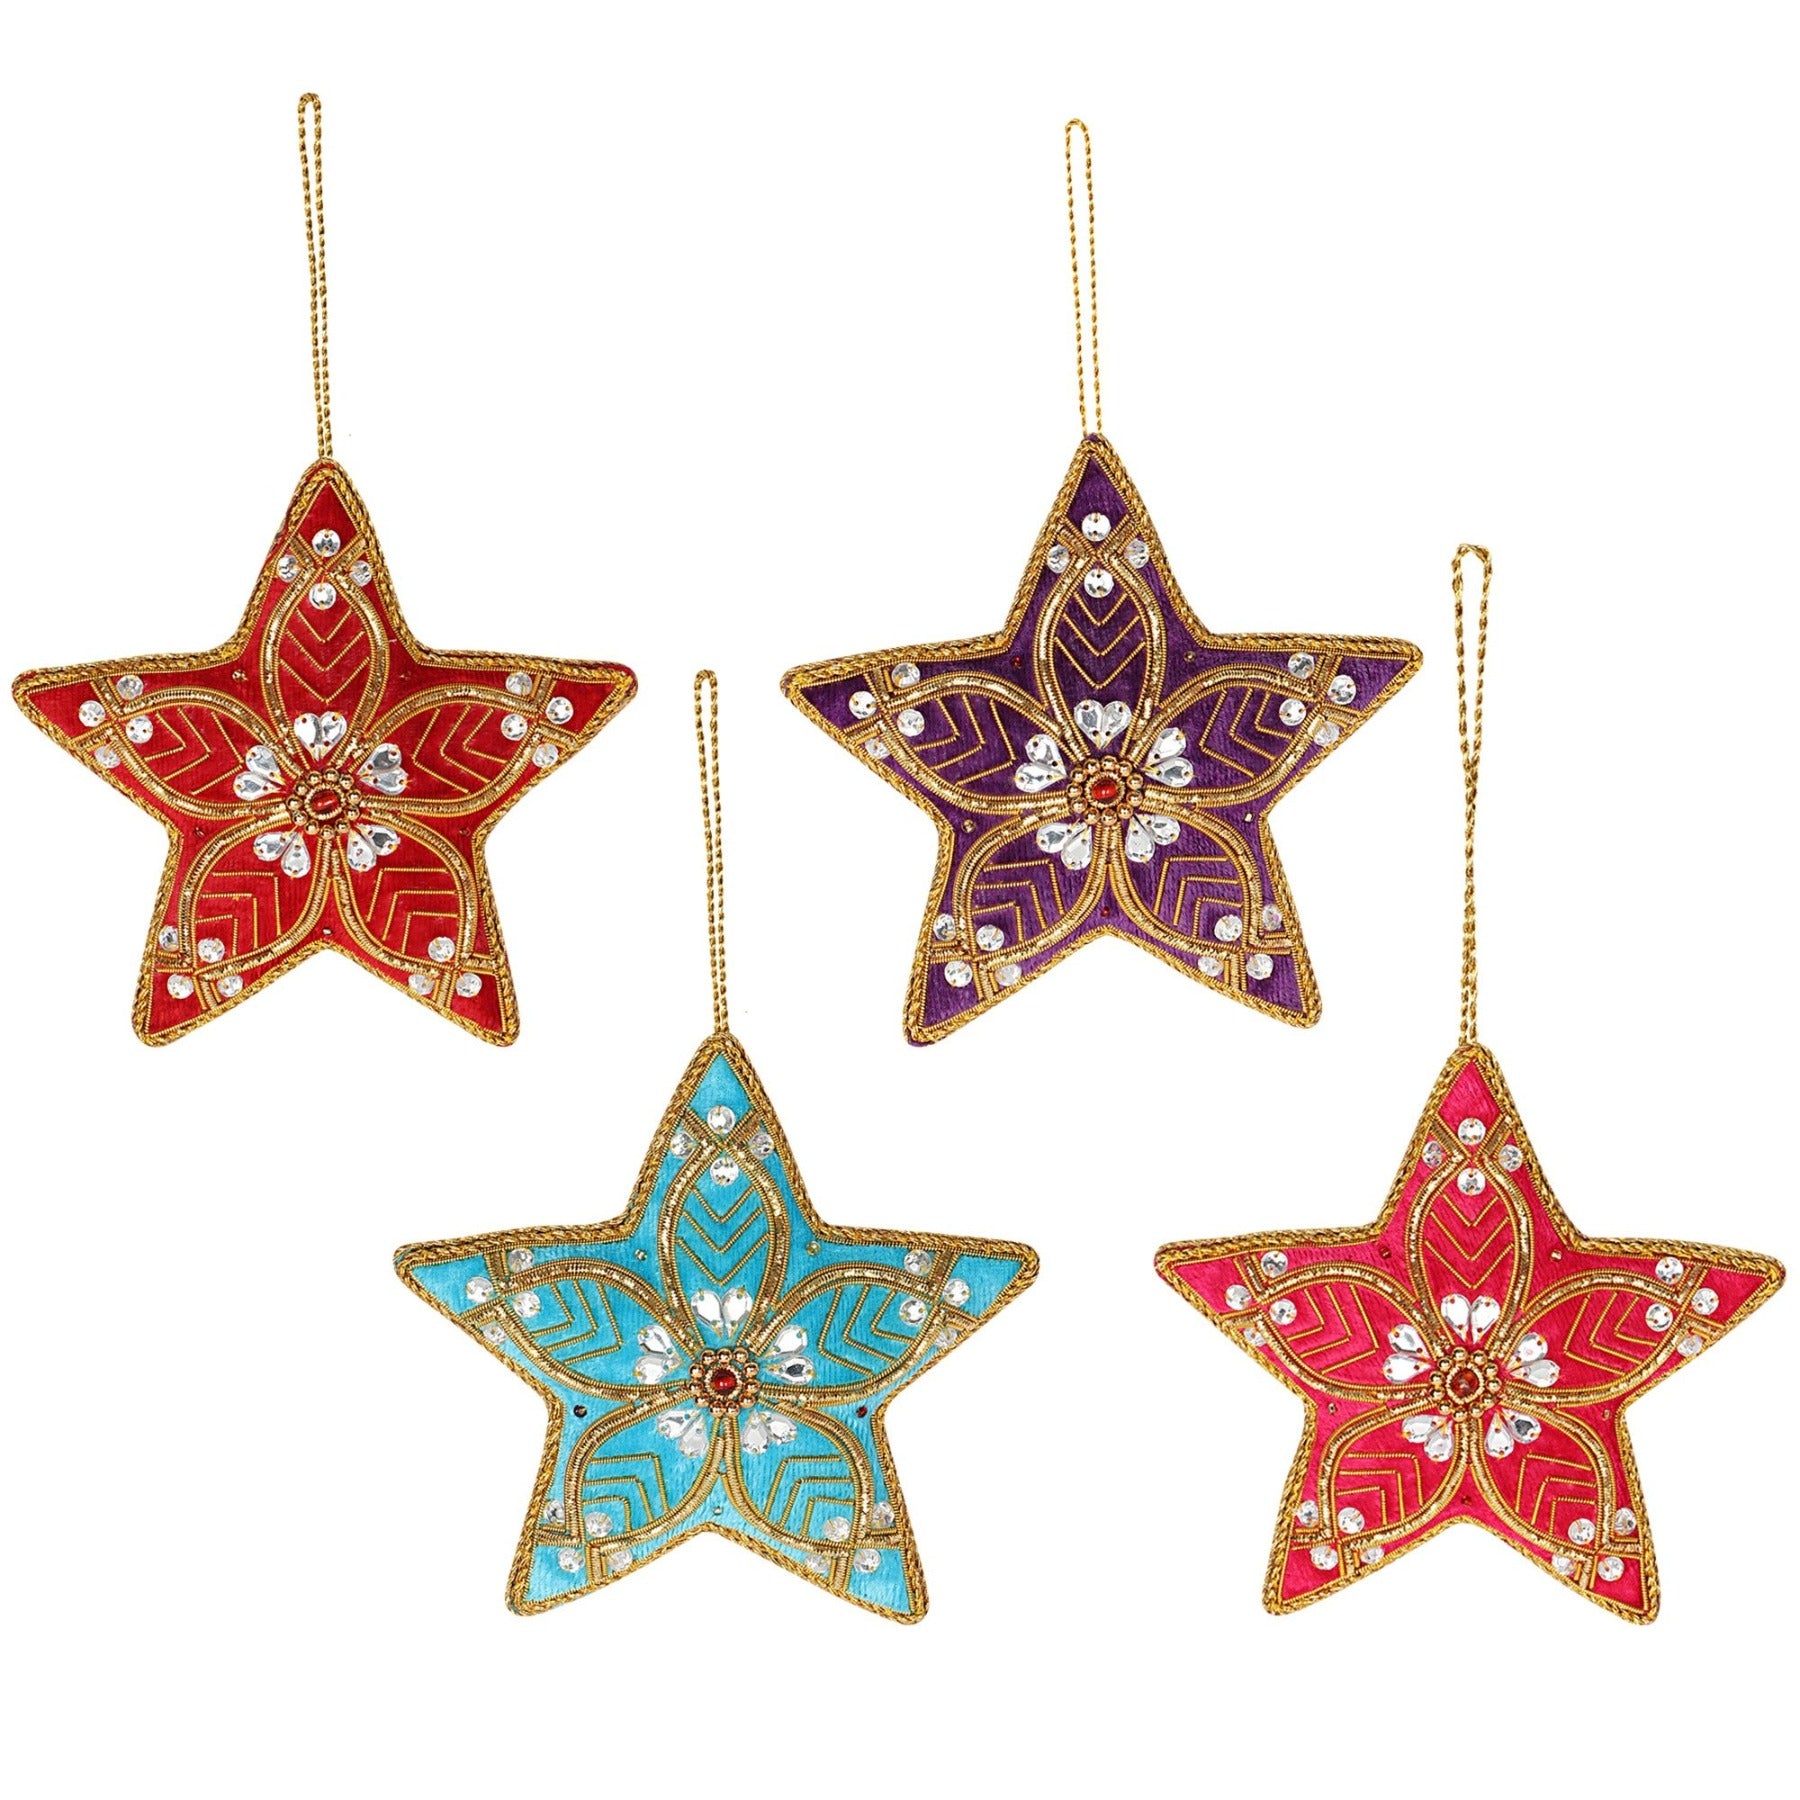 Cheerful Stars Christmas ornaments set of 4 pieces for holiday decor (1SET=4PC)